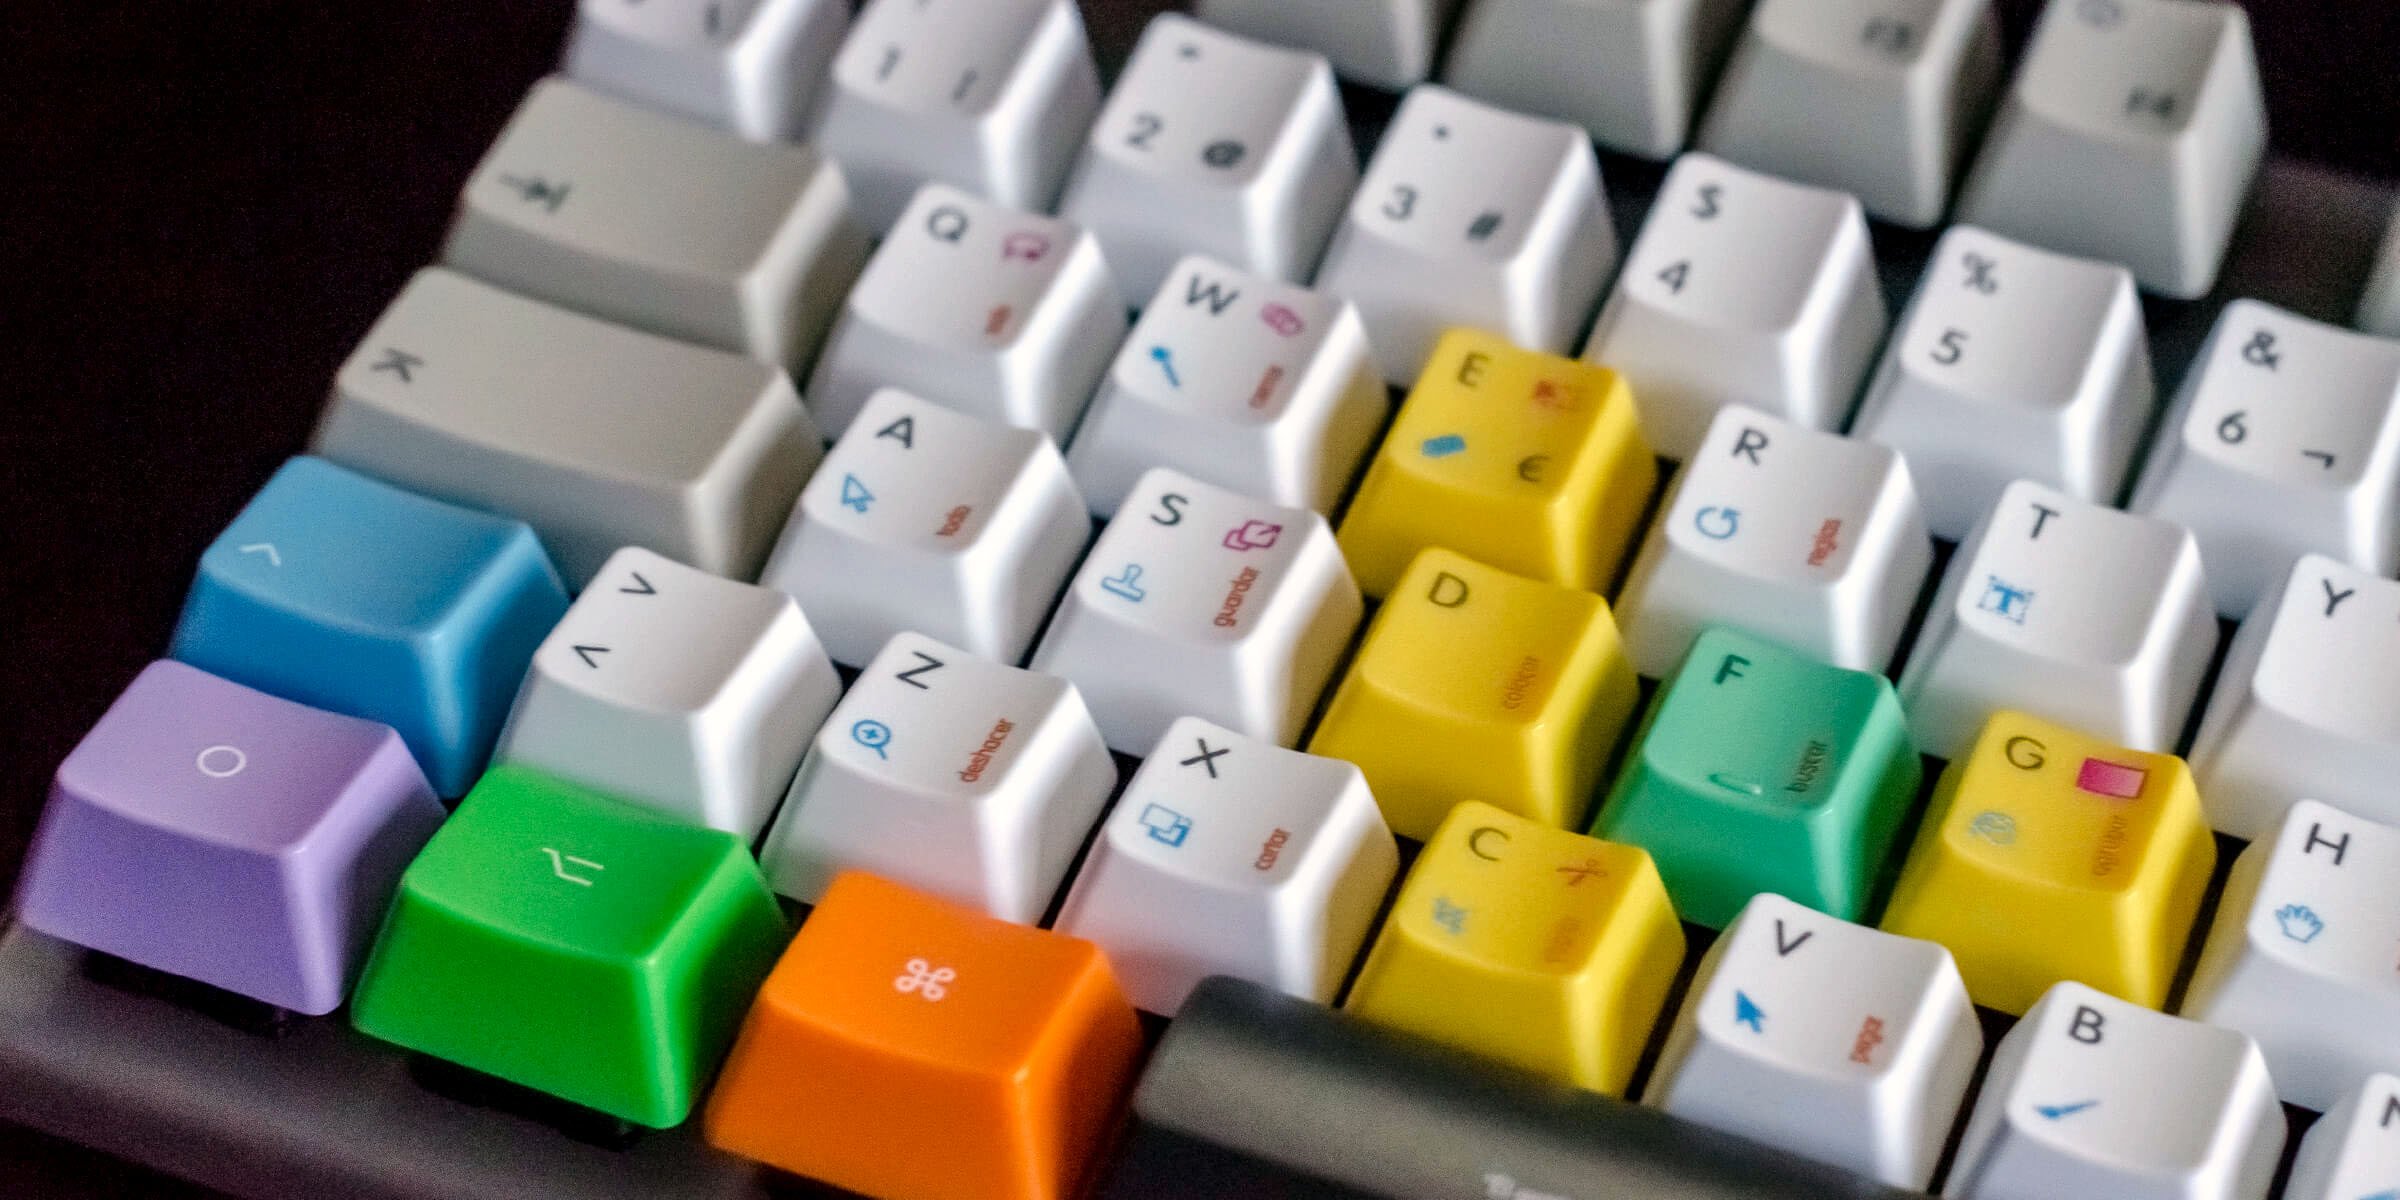 Image of a computer keyboard